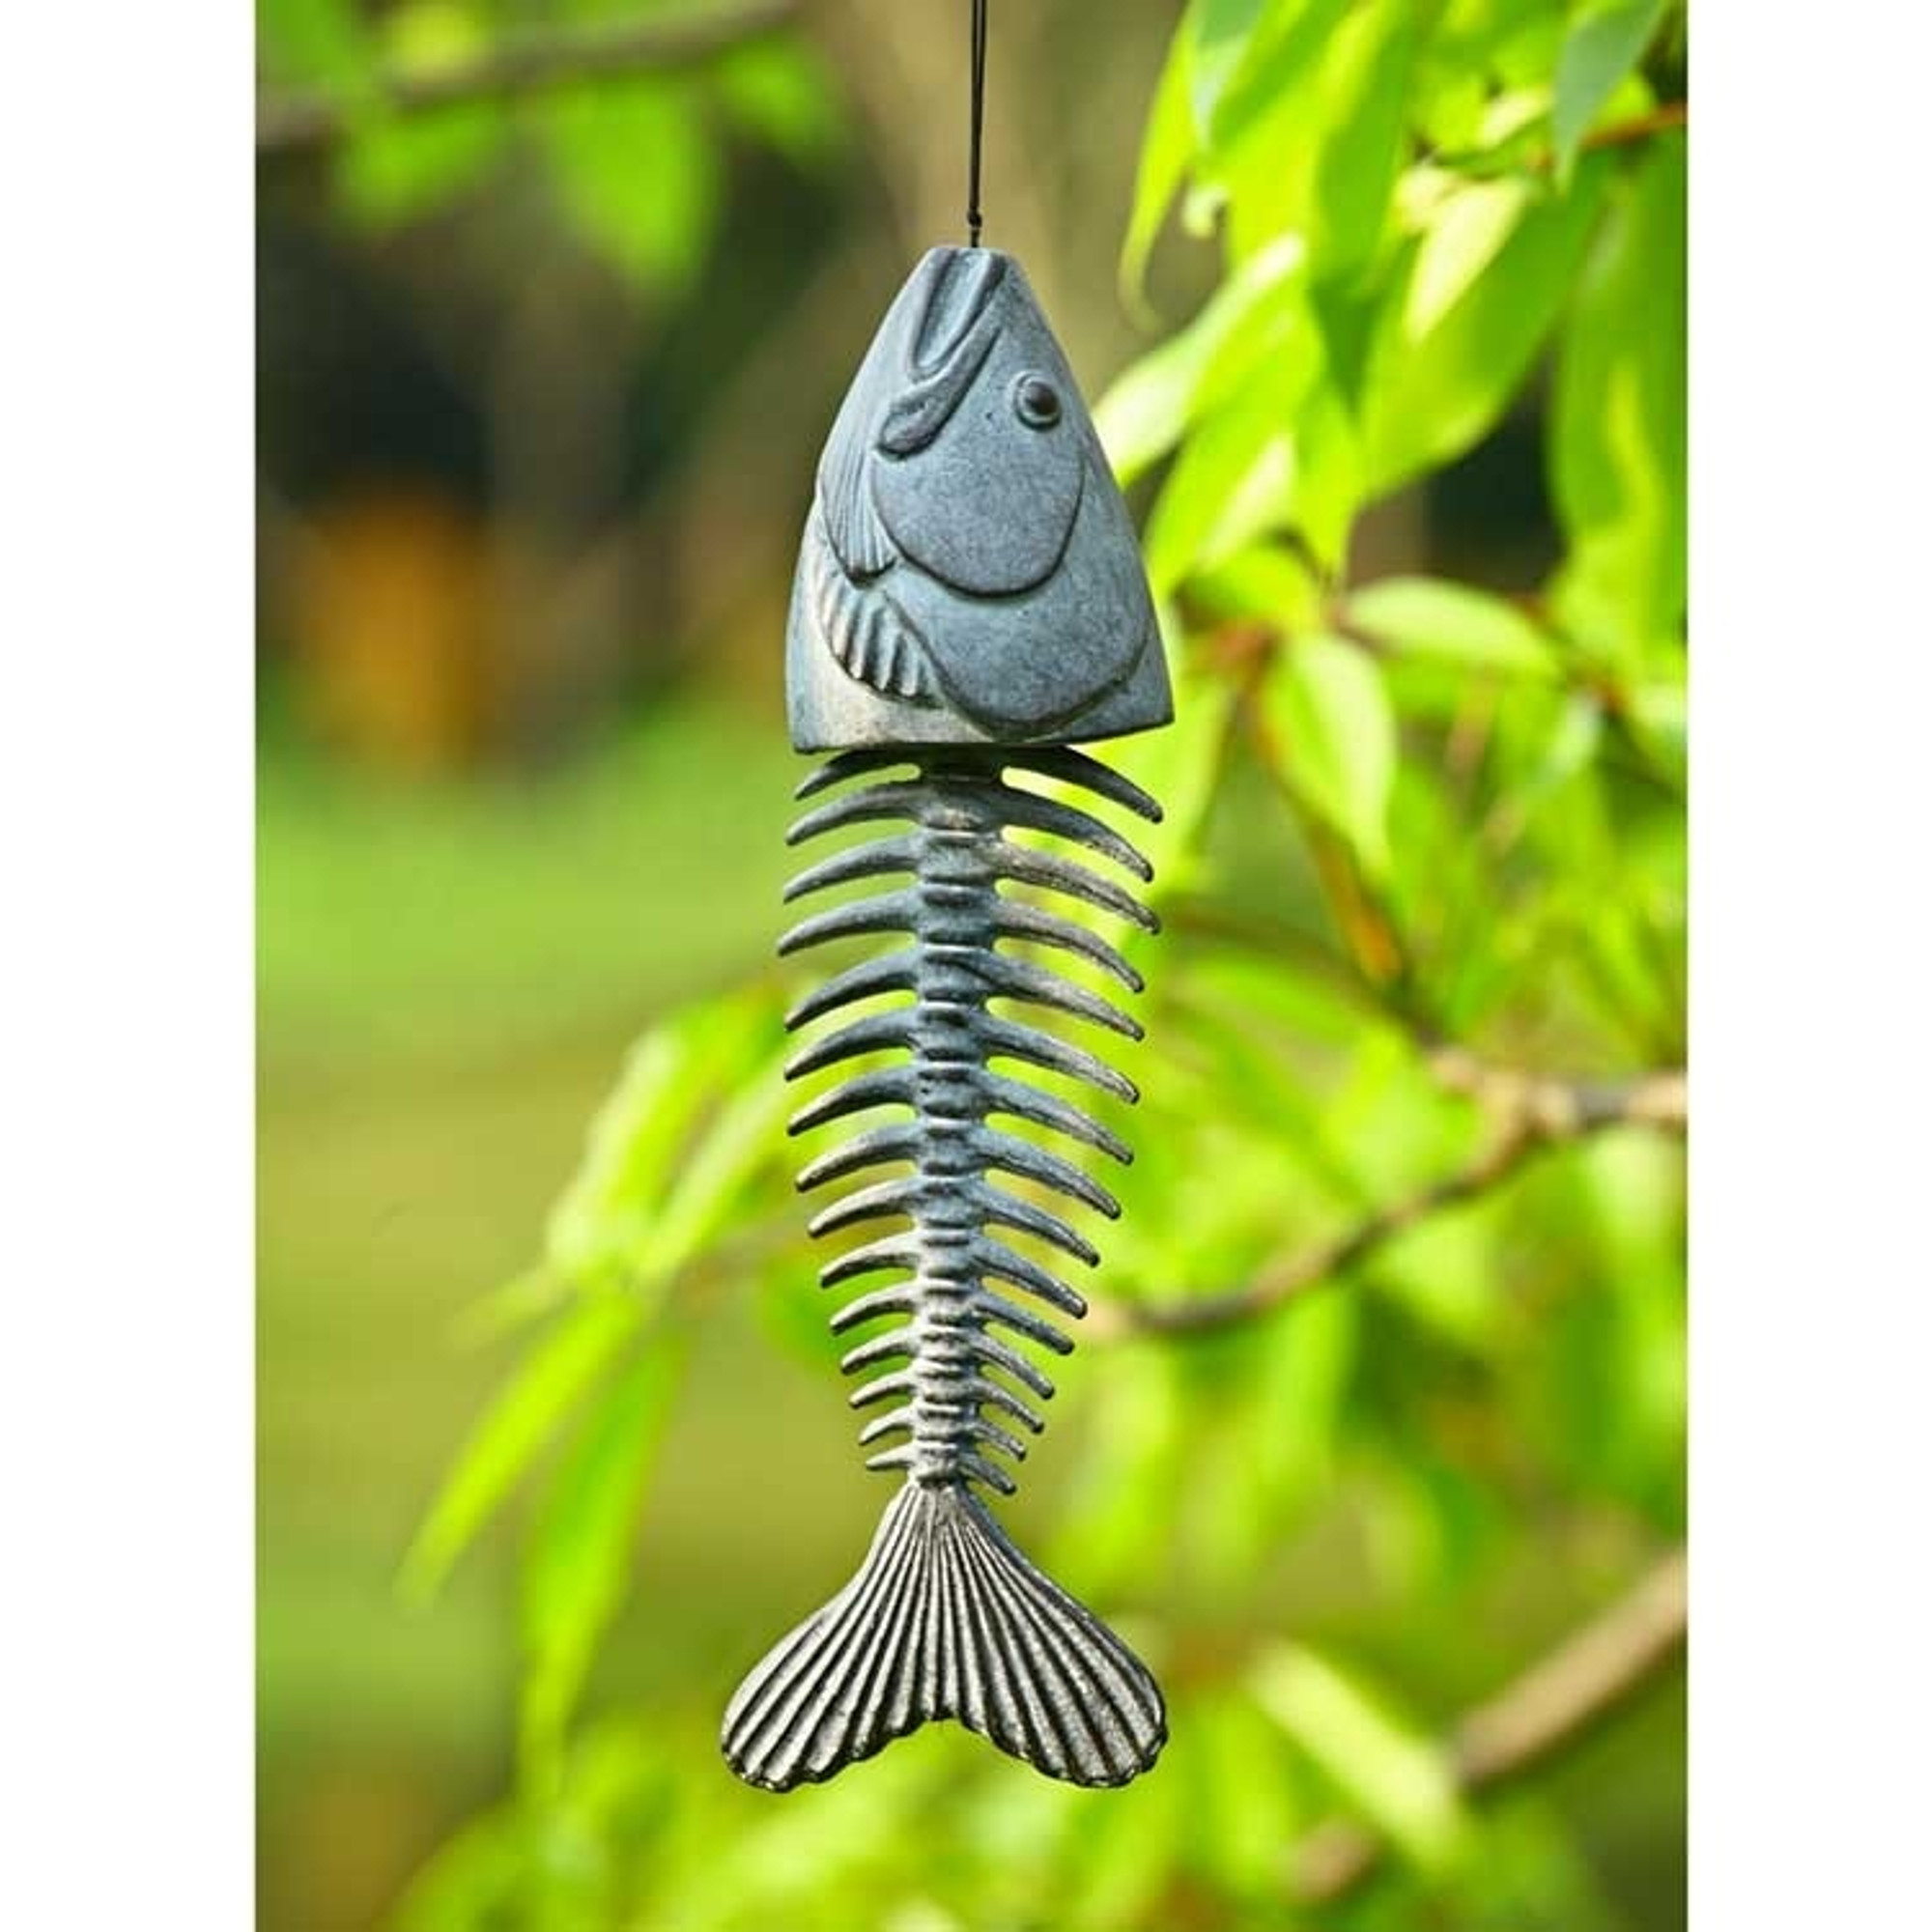 Vintage Metal Wind Chimes Outdoor Soothing Melody for Garden Home Yard Porch Hanging Decor skonhed Fish Skeleton Windchime,Fishbone Wind Chimes,Bronze Fish Bone Cast Iron Wind Chimes